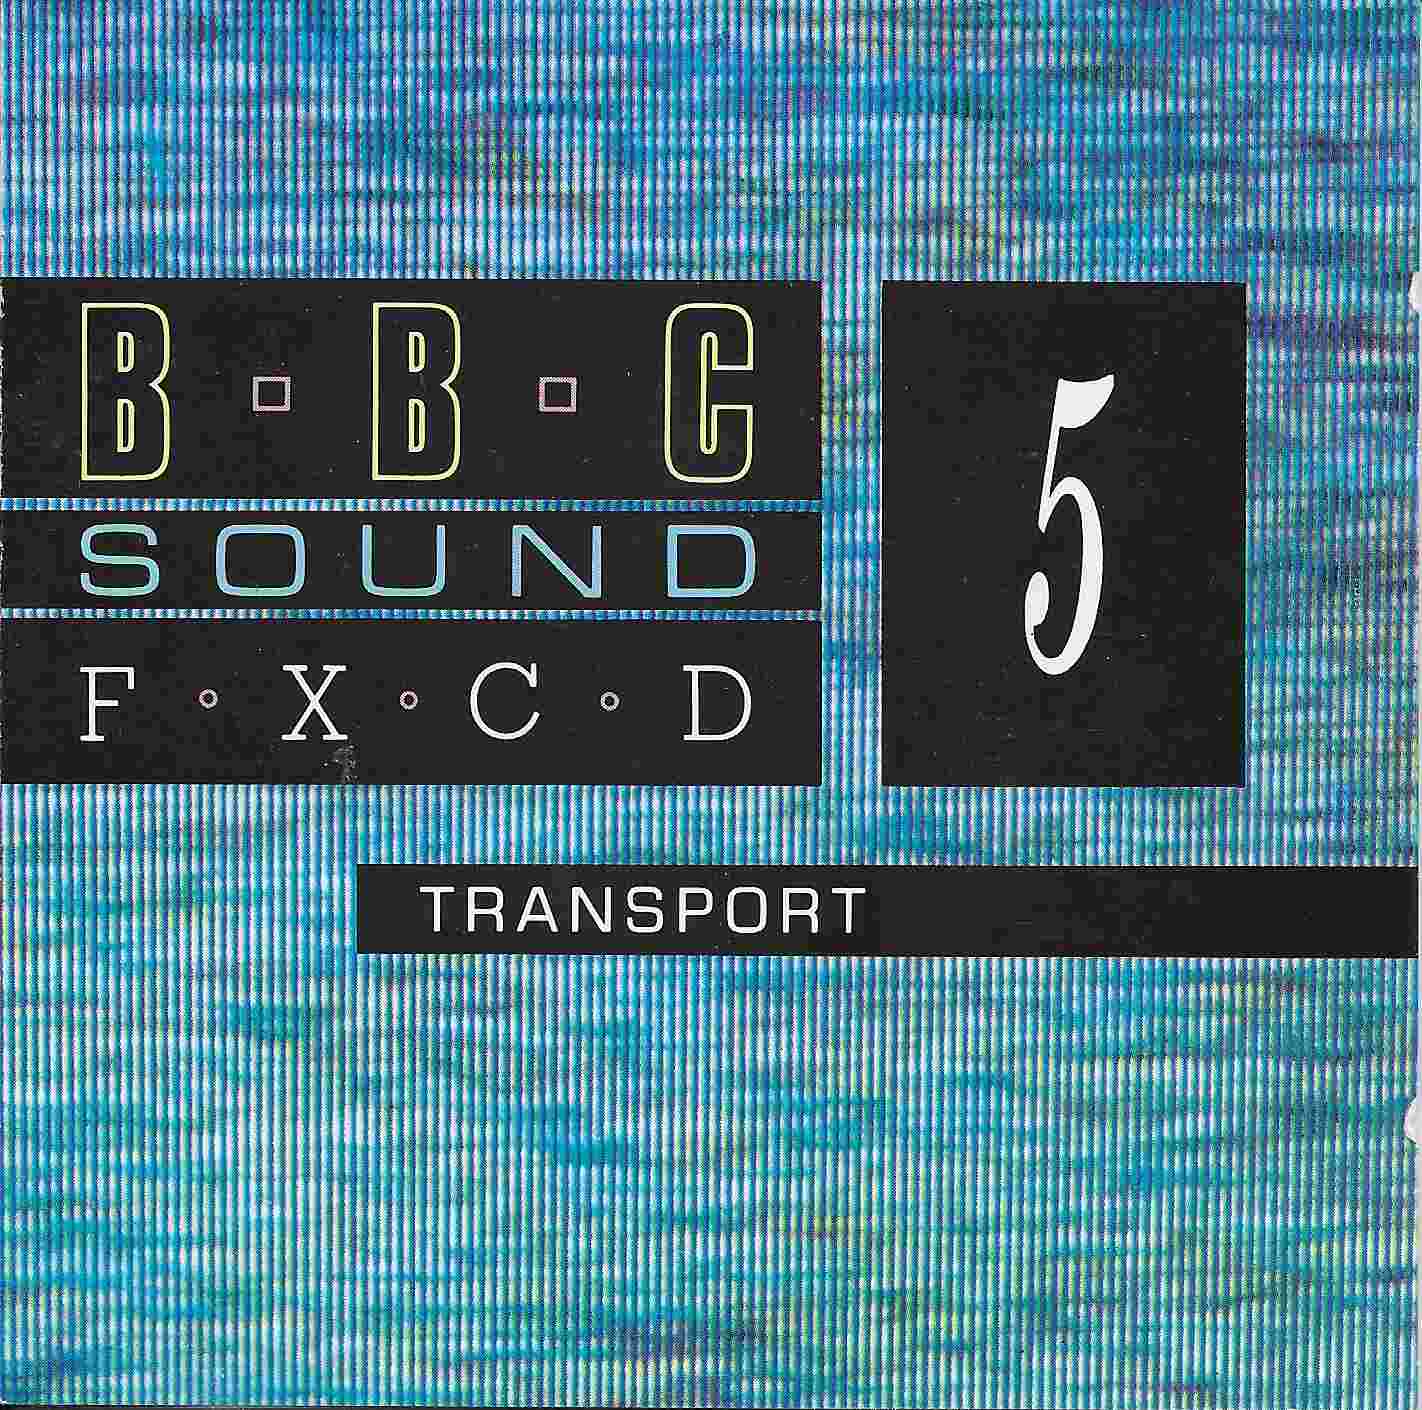 Picture of BBCCD SFX005 Transport by artist Various from the BBC records and Tapes library